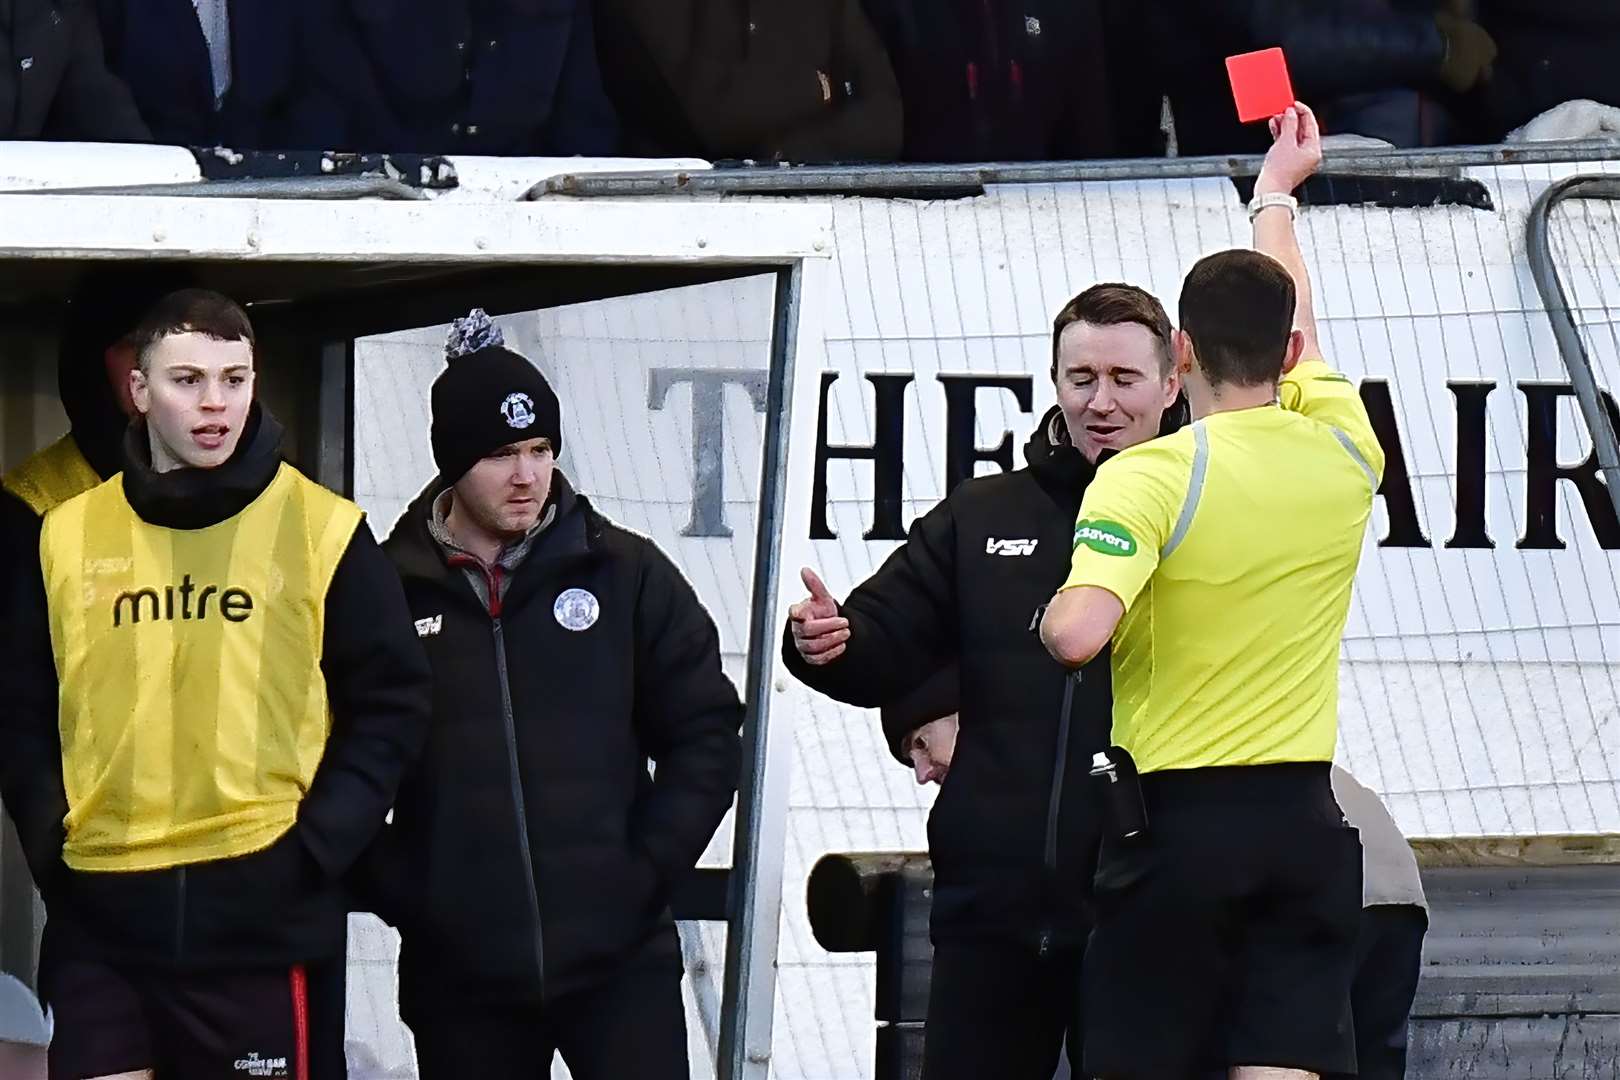 Referee Scott Donohoe shows the red card to Wick Academy manager Gary Manson during the first half of Saturday's match at Harmsworth Park. Looking on are substitute Conor Farquhar and goalkeeping coach James More. Picture: Mel Roger